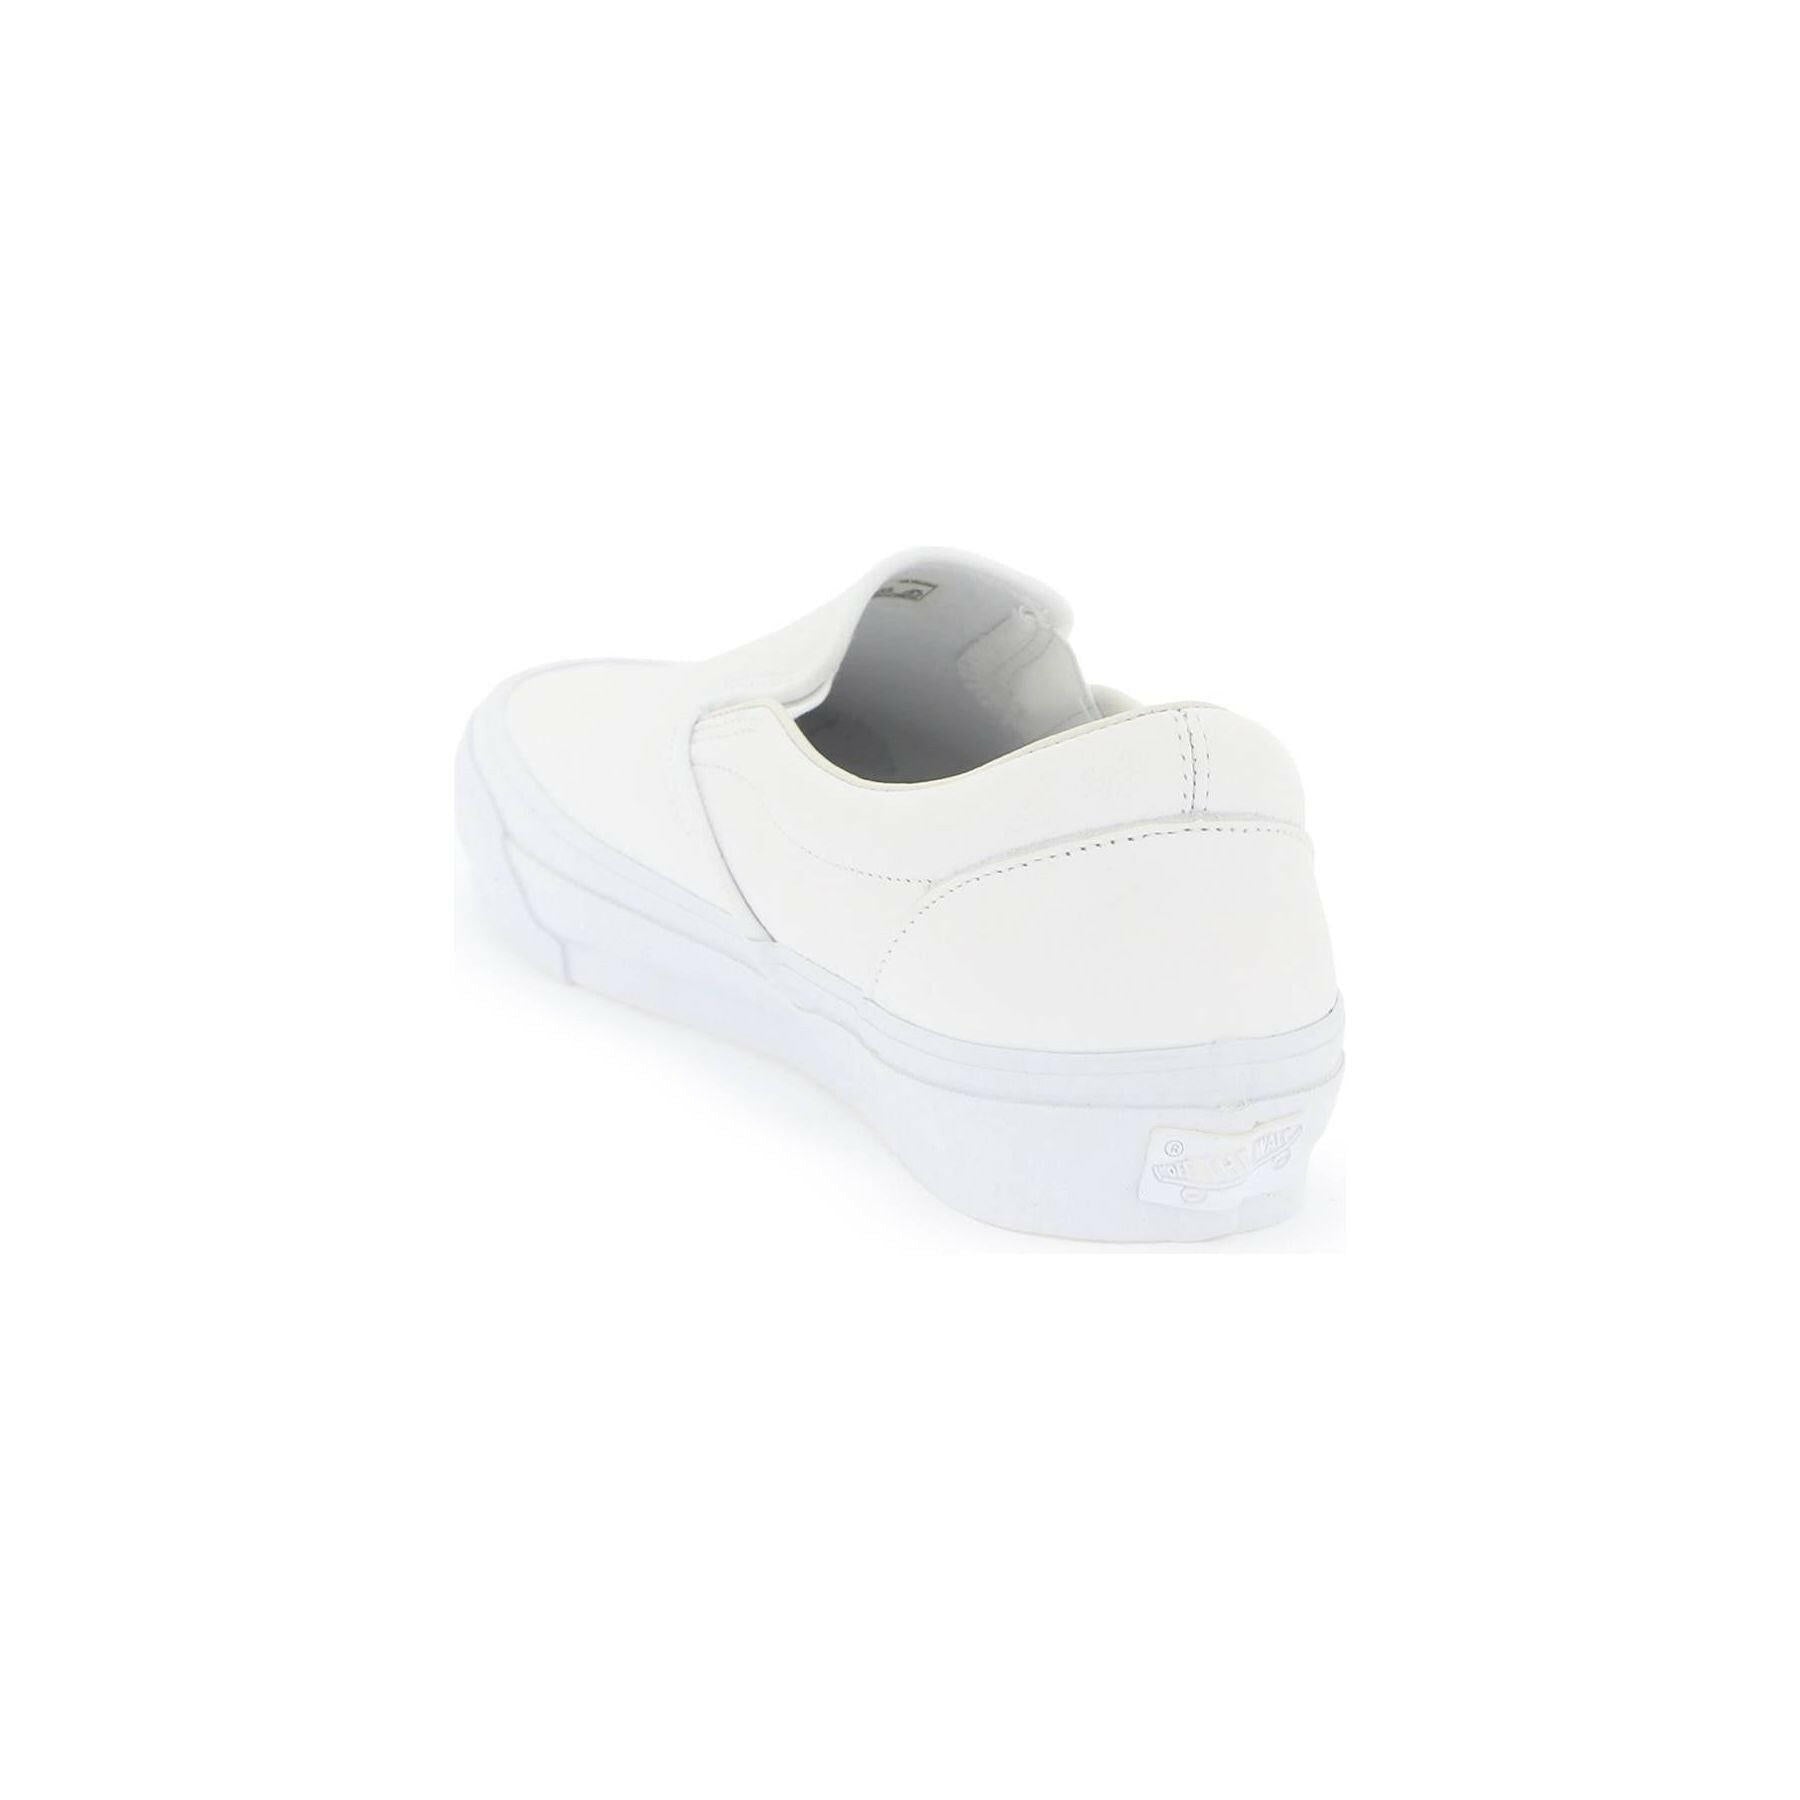 Reissue 98 Leather Slip-on Sneakers